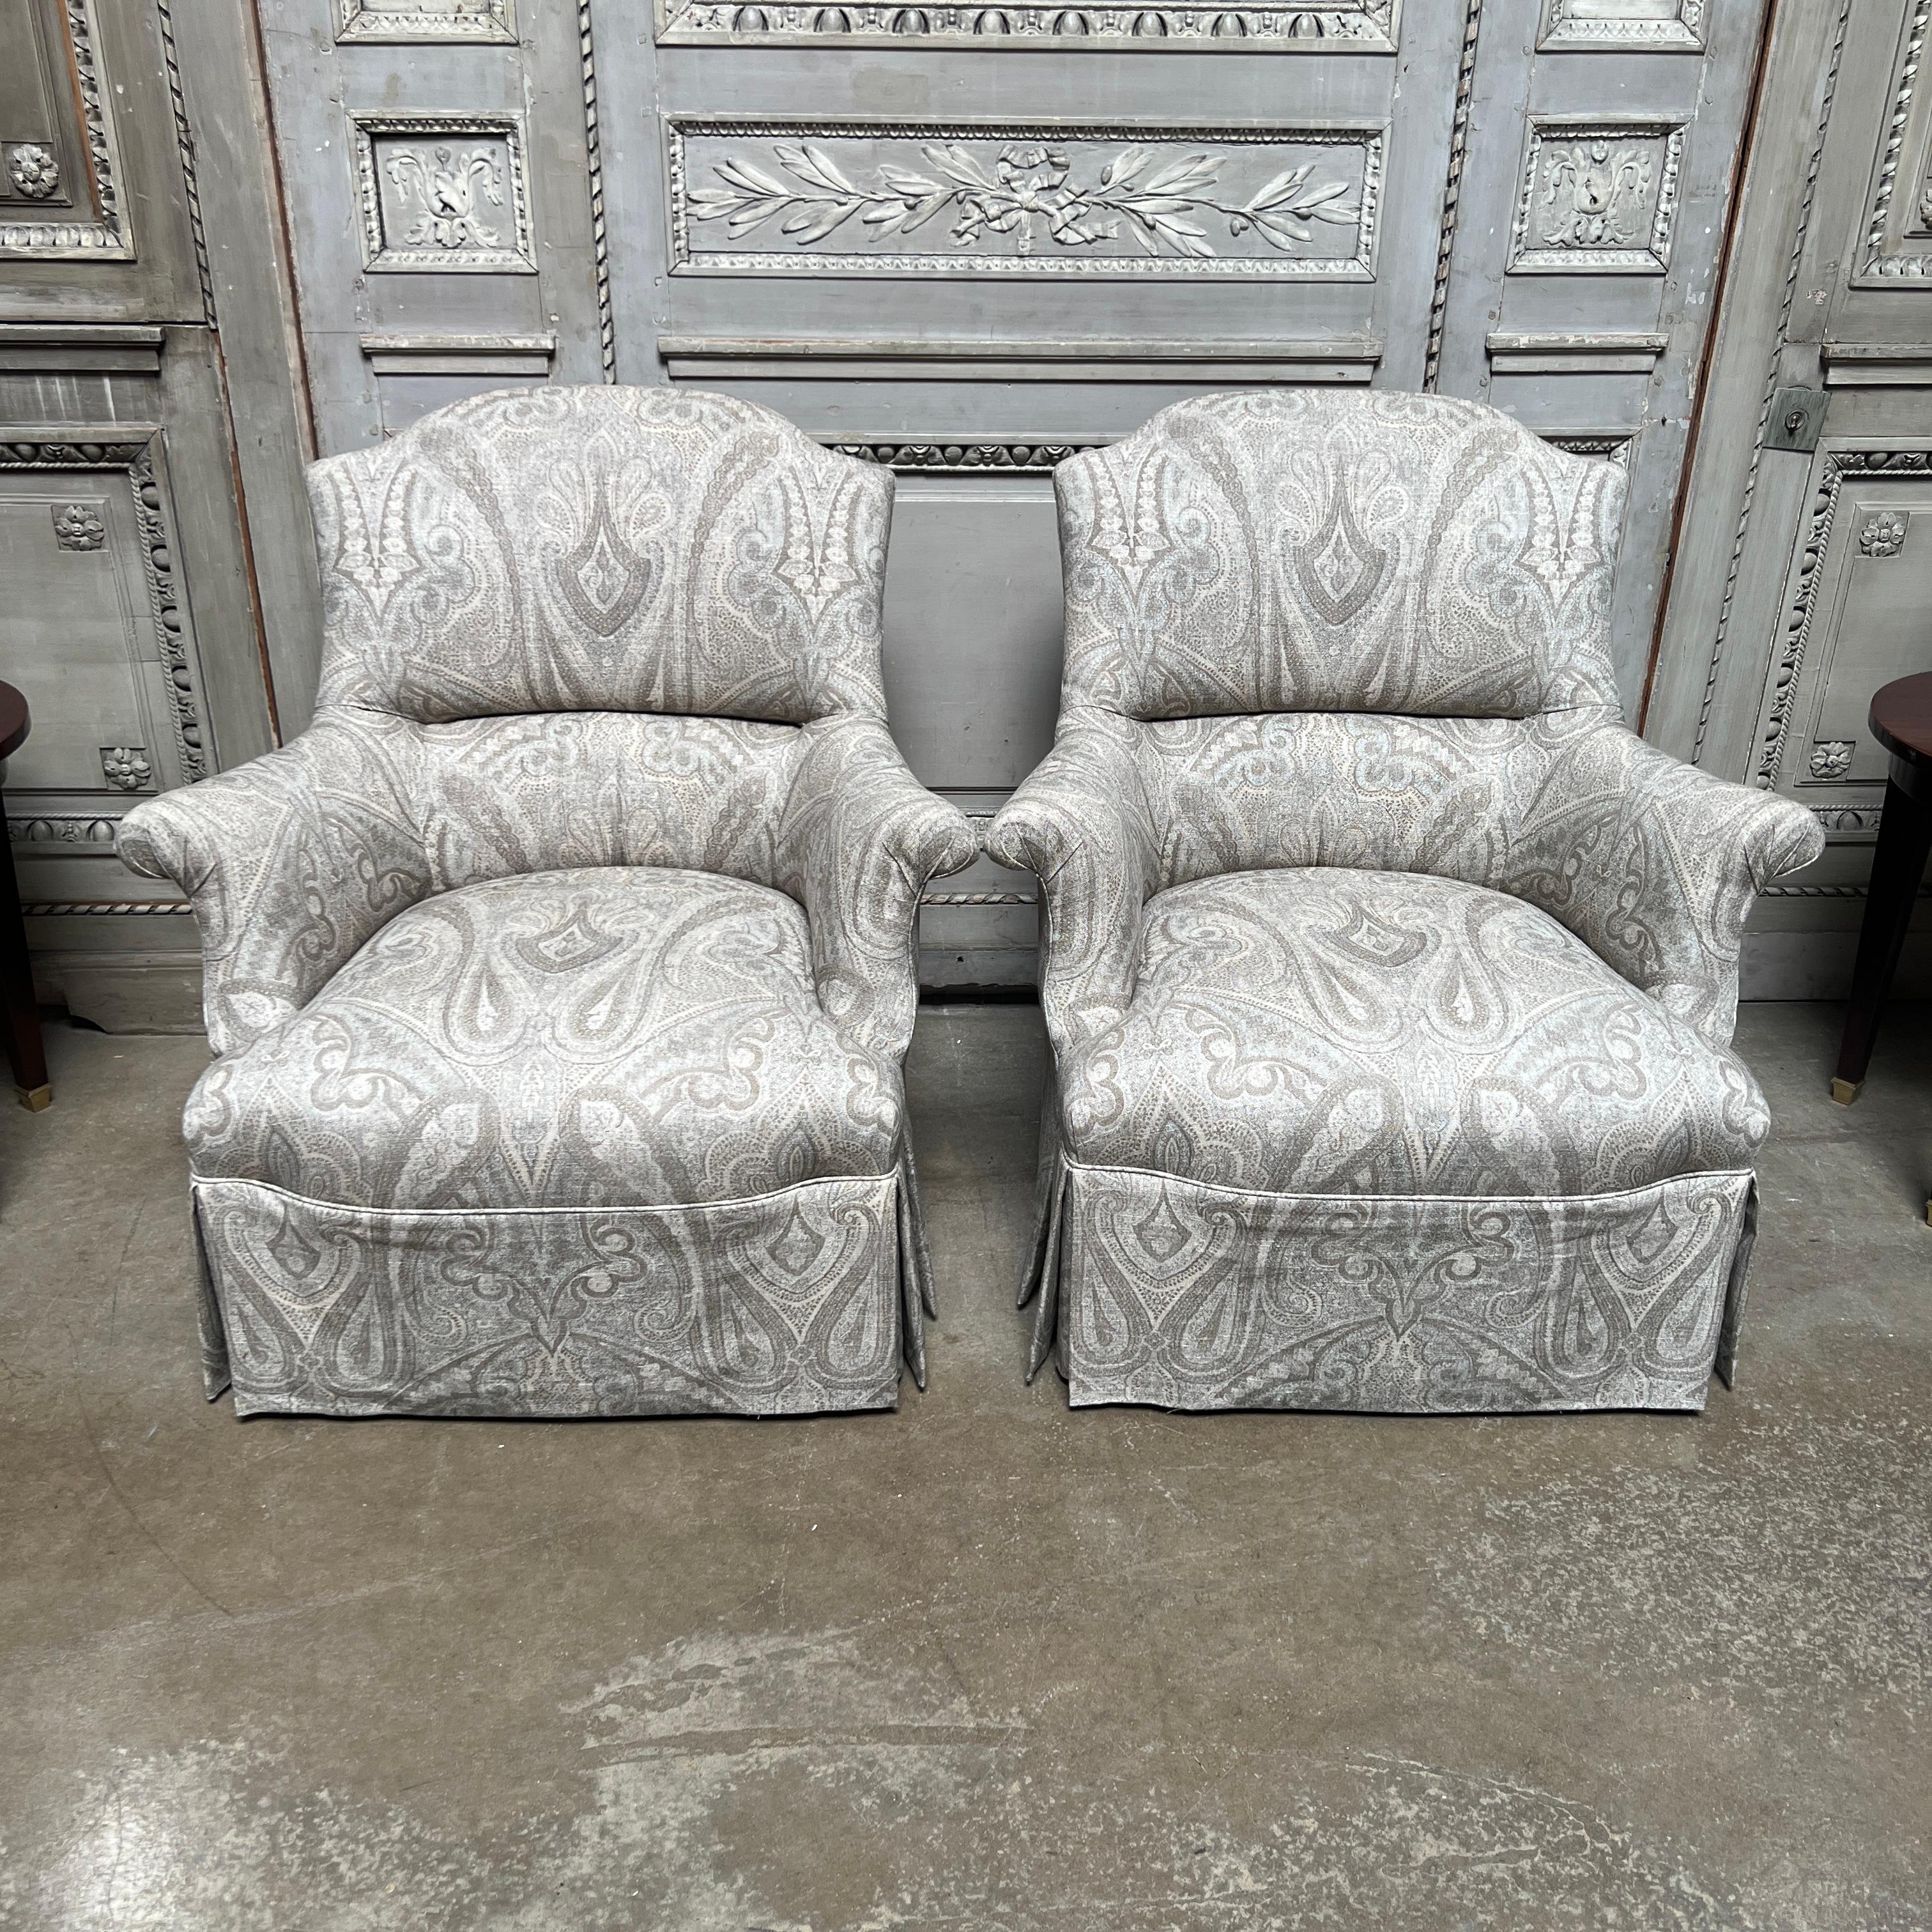 A pair of 21st century Napoleon III style armchairs in the style of Madeleine Castaing. This pair of comfortable and very stylish chairs are a few years old and were copied after an antique pair that we had in stock.